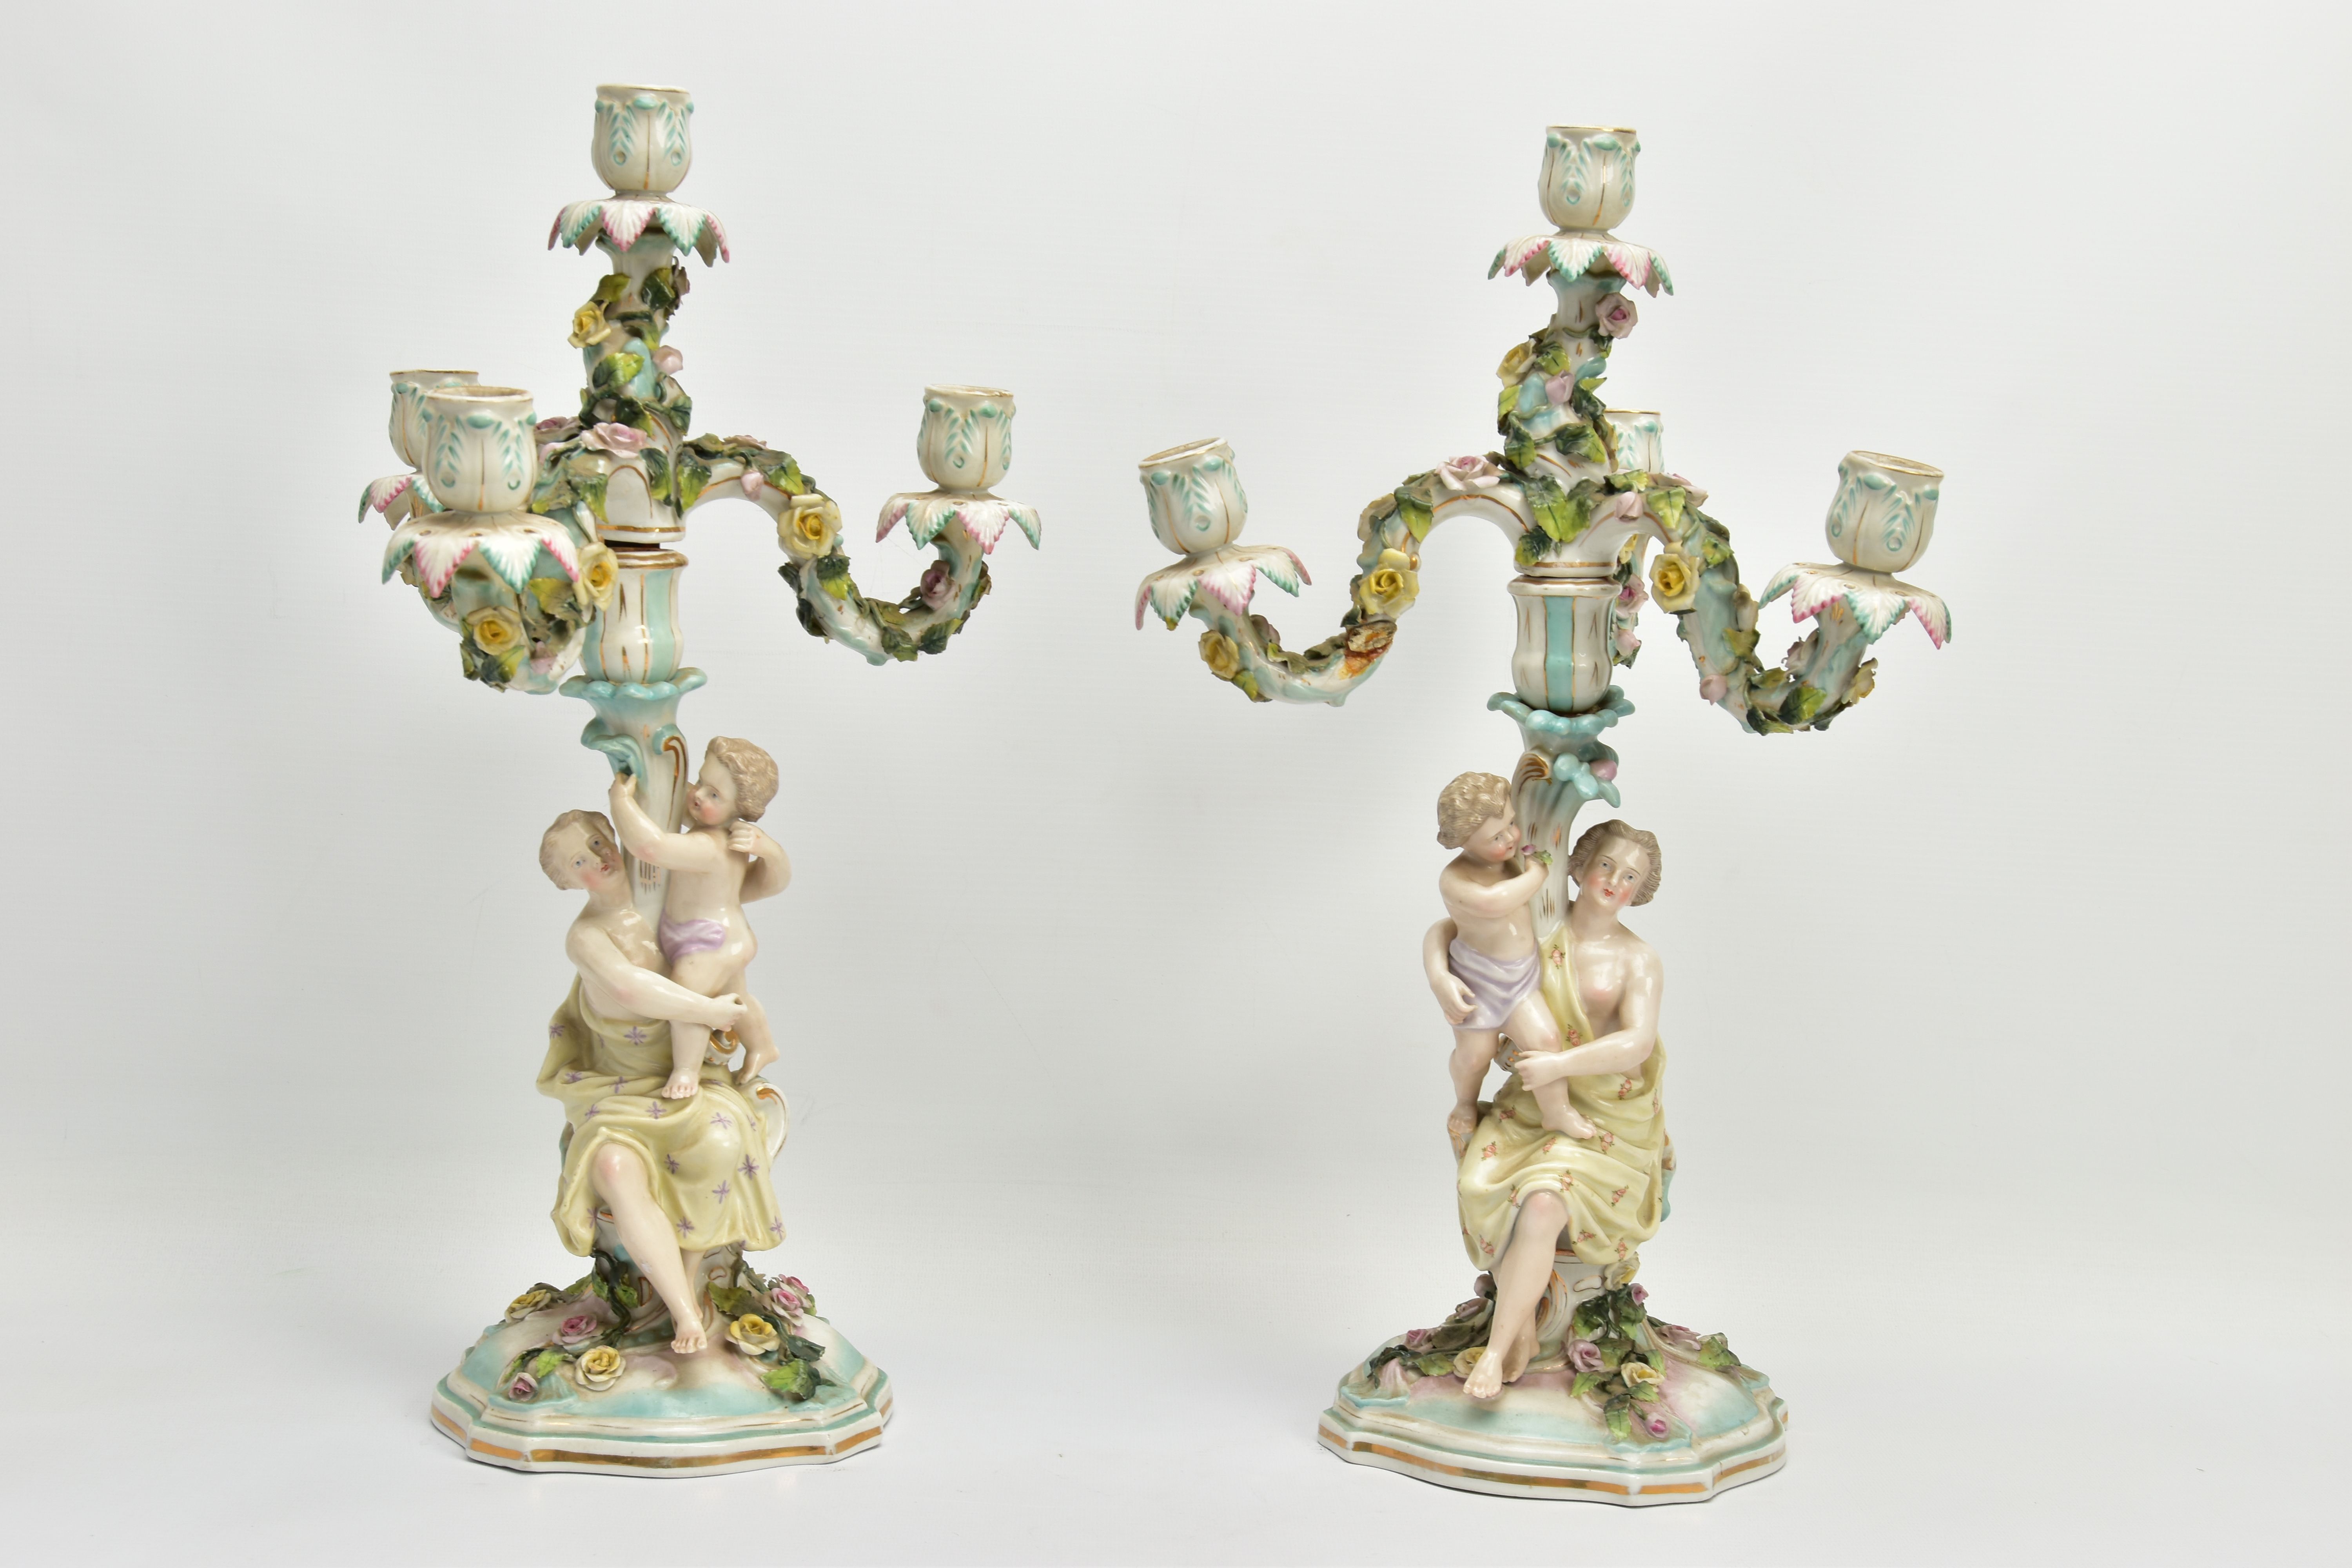 A PAIR OF LATE 19TH / EARLY 20TH CENTURY PLAUE PORCELAIN FLORALLY ENCRUSTED FIGURAL CANDELABRA, each